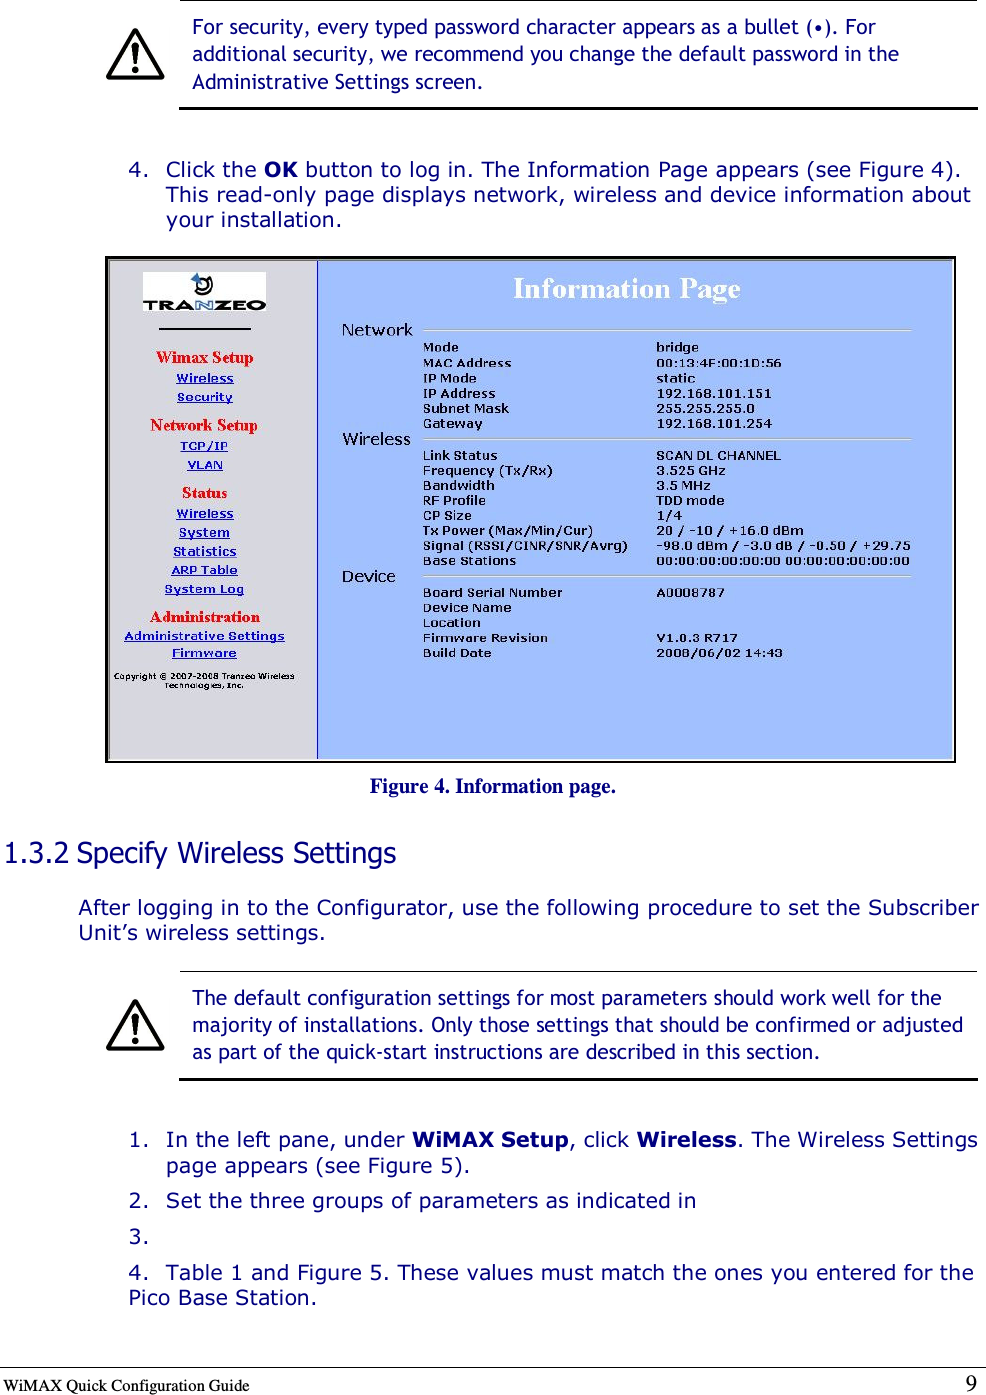  WiMAX Quick Configuration Guide   9     For security, every typed password character appears as a bullet (•). For additional security, we recommend you change the default password in the Administrative Settings screen.  4. Click the OK button to log in. The Information Page appears (see Figure 4). This read-only page displays network, wireless and device information about your installation.  Figure 4. Information page. 1.3.2 Specify Wireless Settings After logging in to the Configurator, use the following procedure to set the Subscriber Unit’s wireless settings.   The default configuration settings for most parameters should work well for the majority of installations. Only those settings that should be confirmed or adjusted as part of the quick-start instructions are described in this section.  1. In the left pane, under WiMAX Setup, click Wireless. The Wireless Settings page appears (see Figure 5). 2. Set the three groups of parameters as indicated in  3.  4. Table 1 and Figure 5. These values must match the ones you entered for the Pico Base Station. 